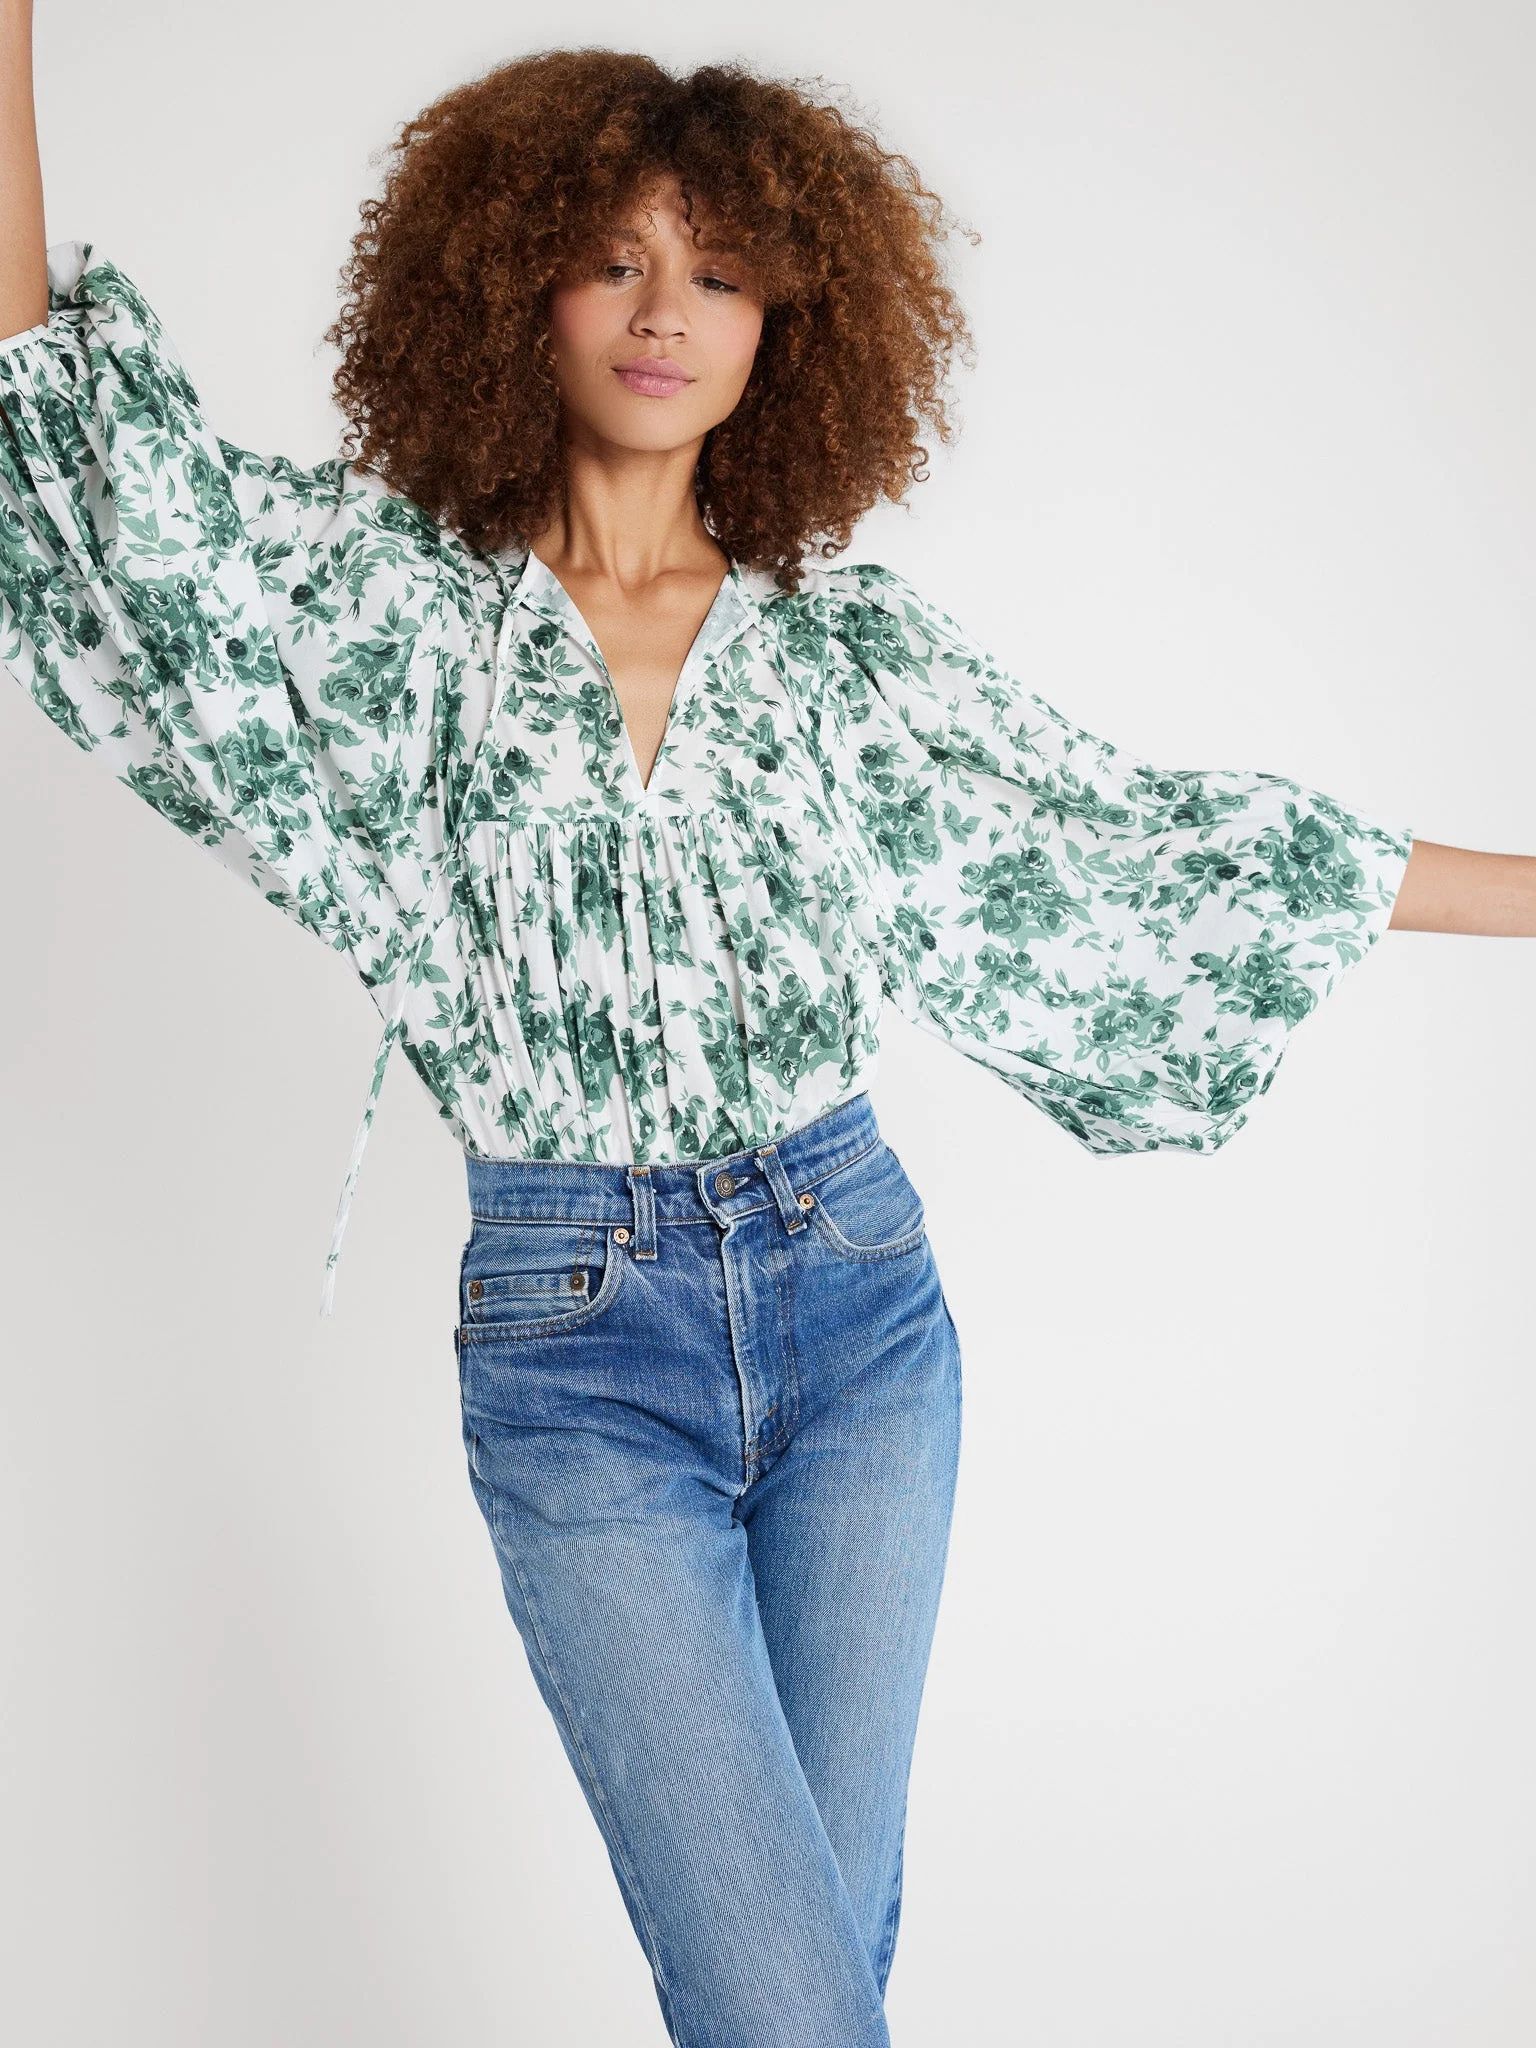 Shop Mille - Charlie Top in Green Bouquet | Mille